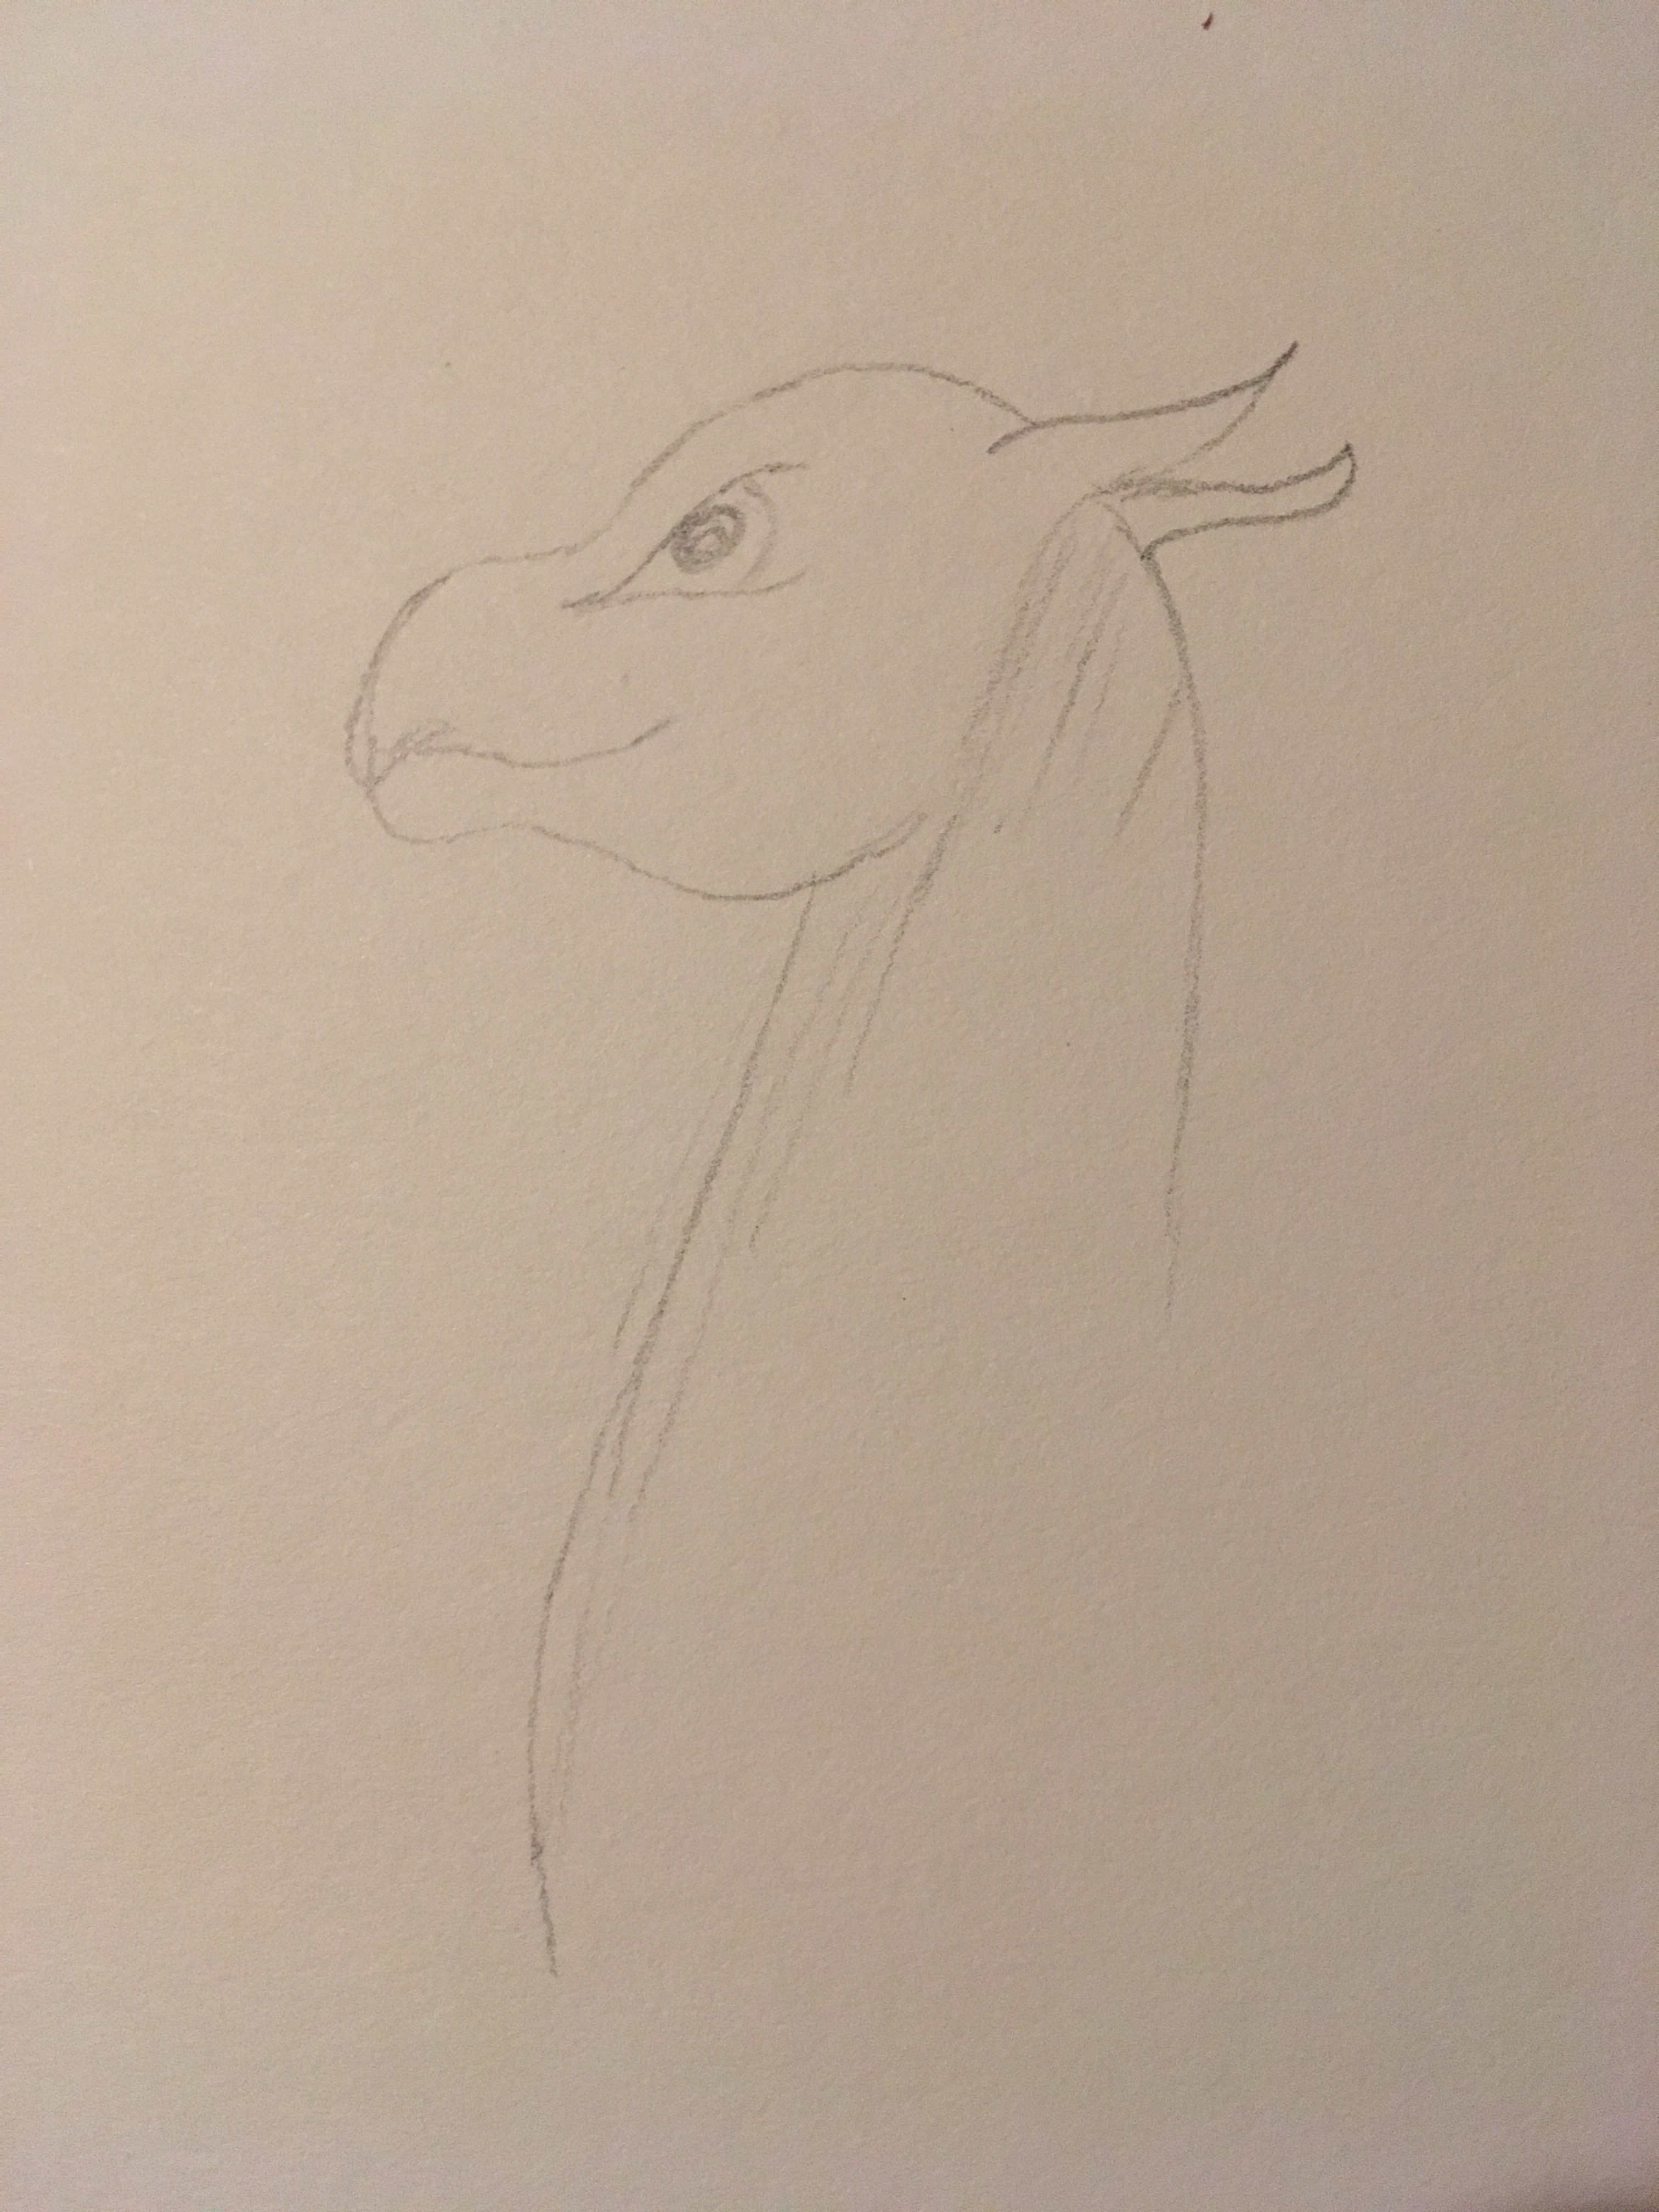 The head of a sweet dragon sketched in pencil